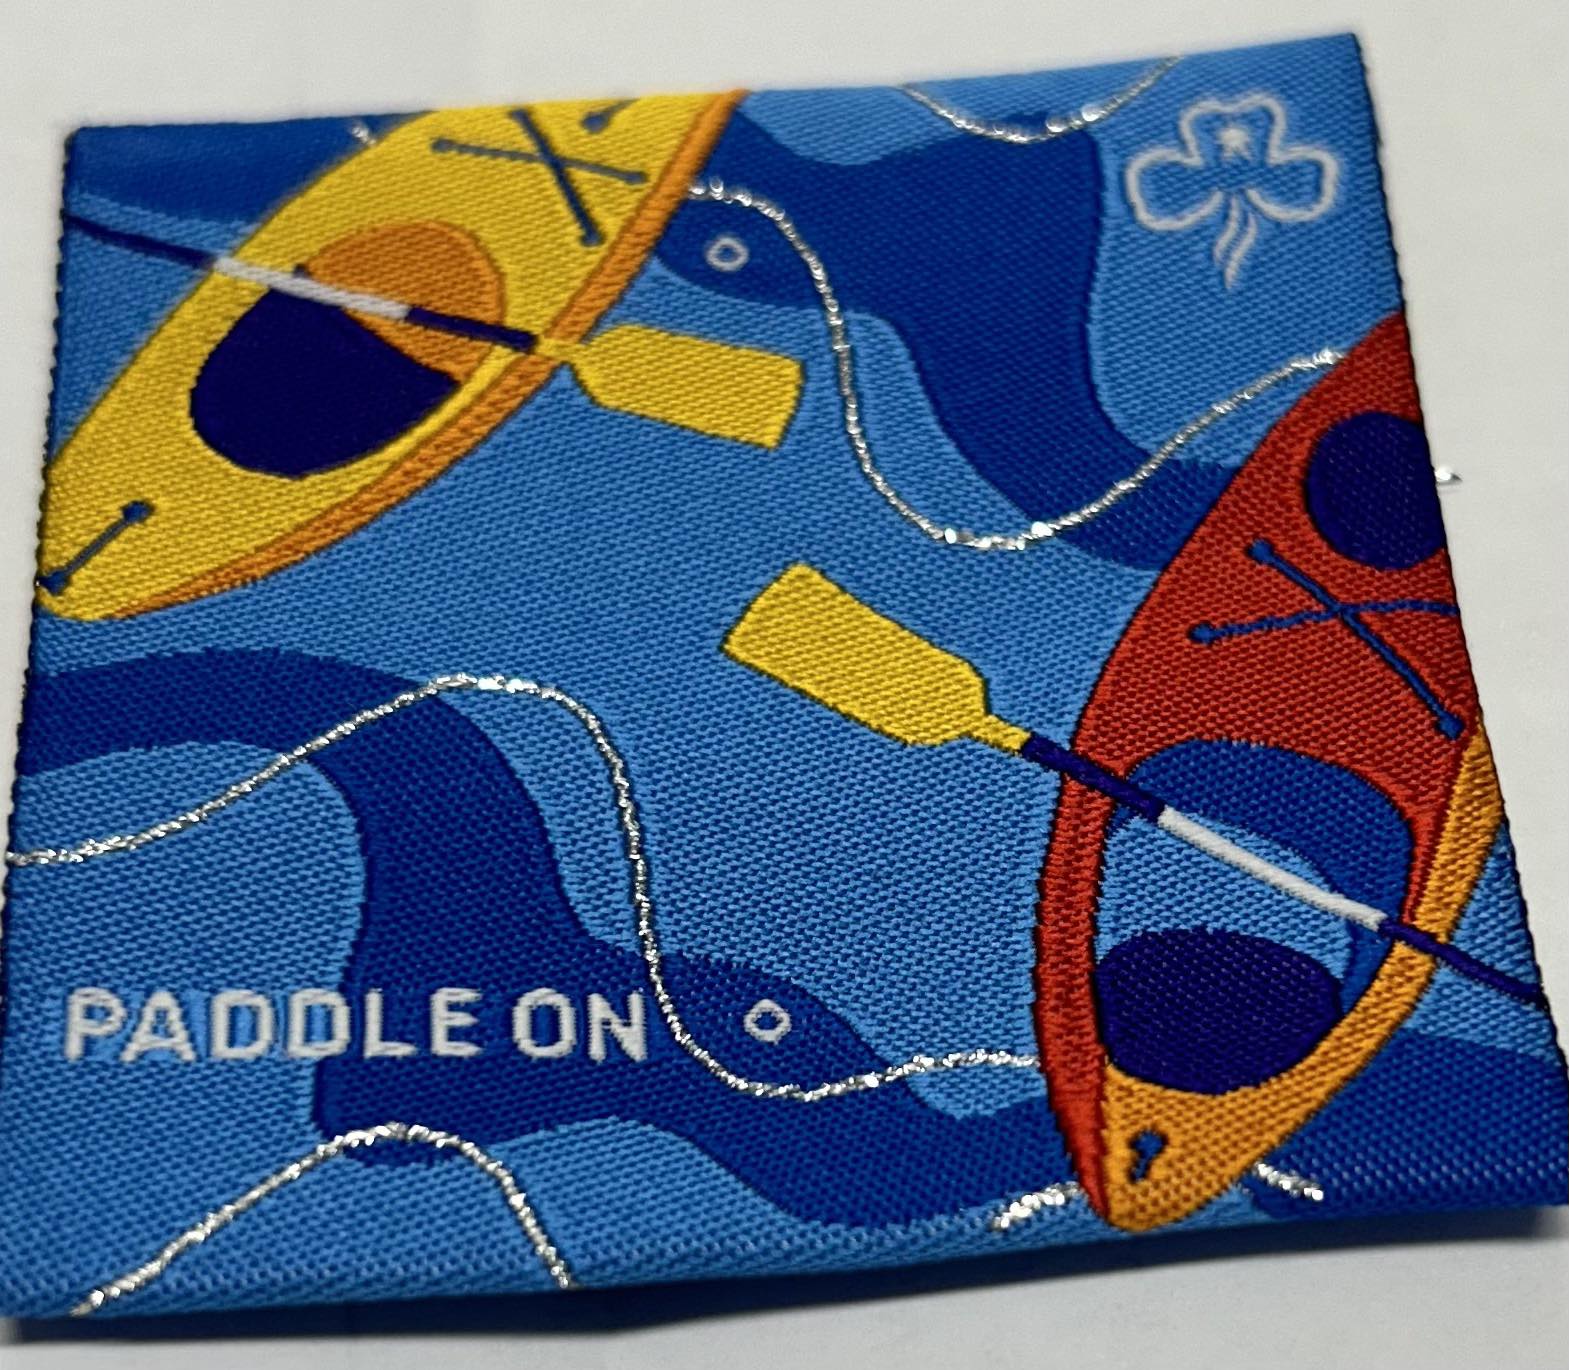 a square unbound blue badge with two kayaks with paddles